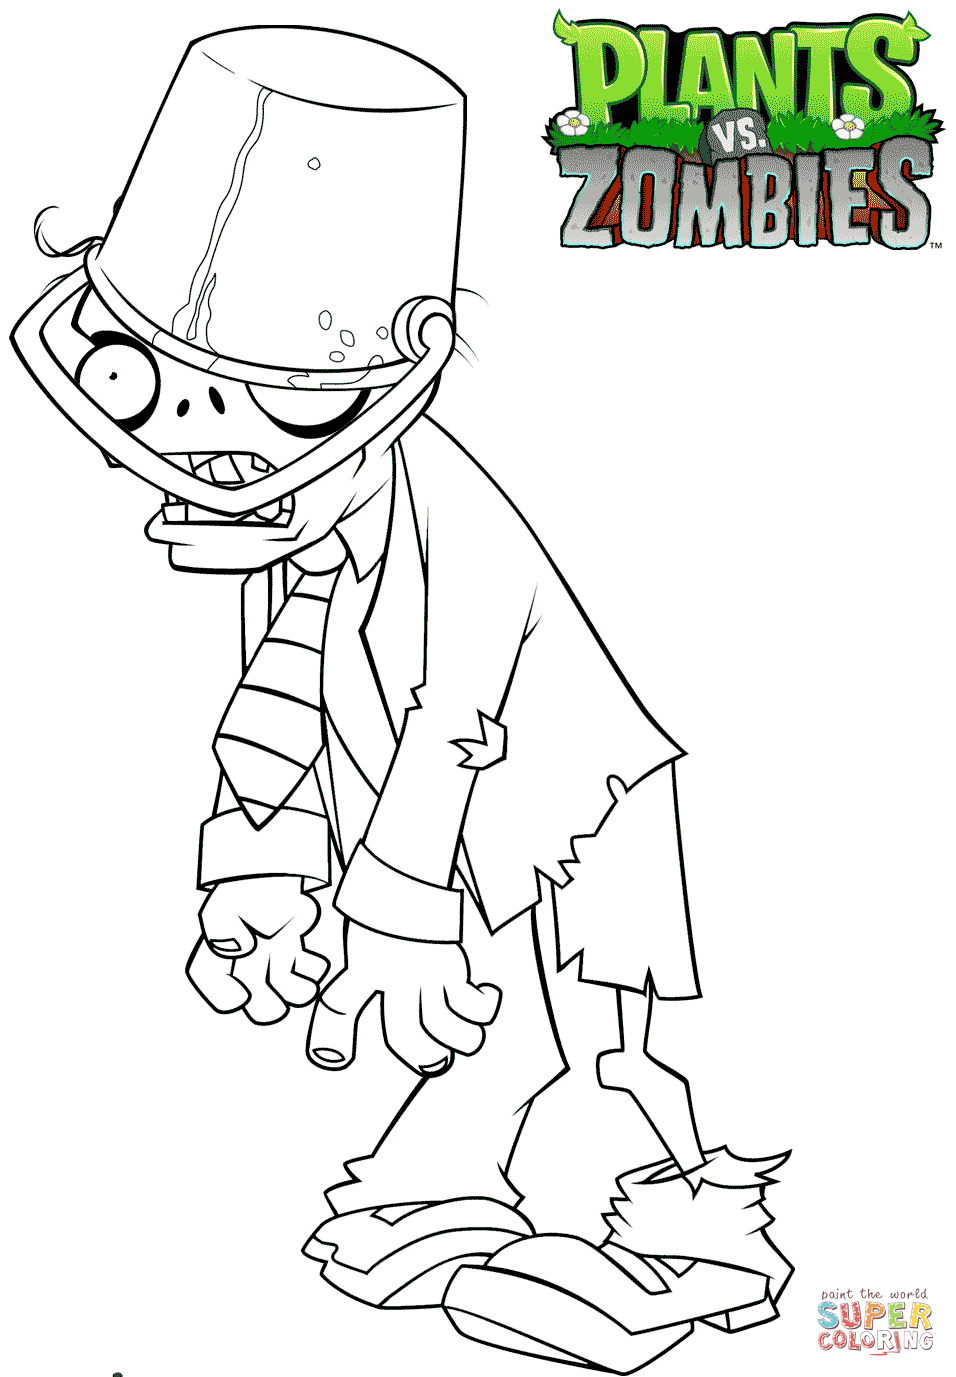 Plants vs zombies buckethead zombie coloring page free printable coloring pages